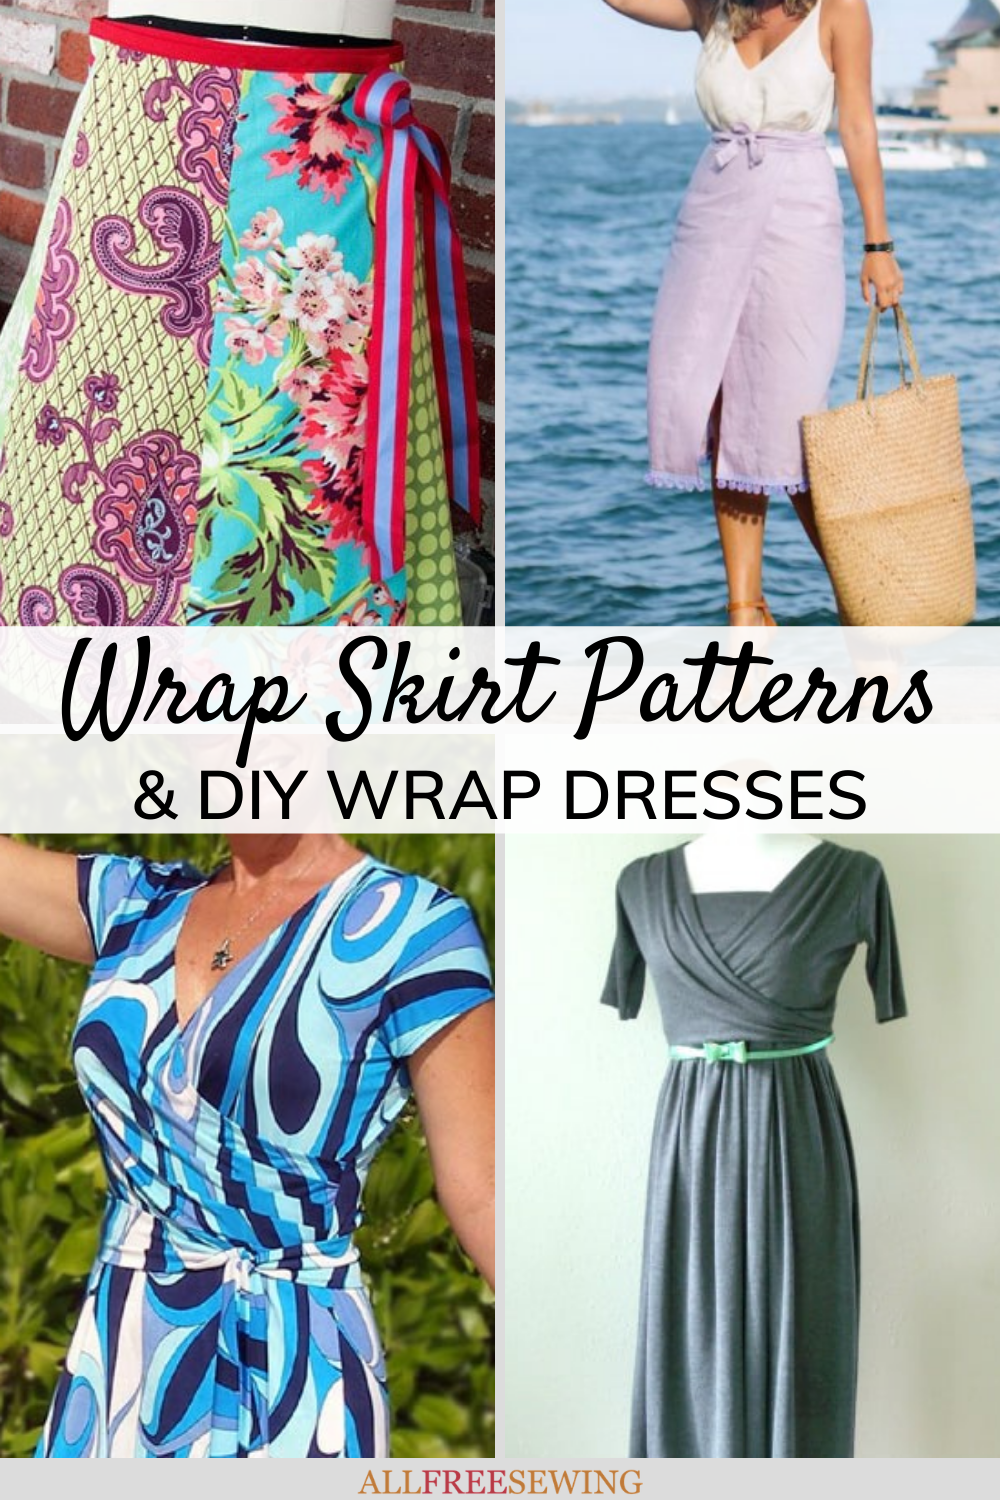 15 Wrap Skirt Patterns and DIY Wrap Dresses | AllFreeSewing.com